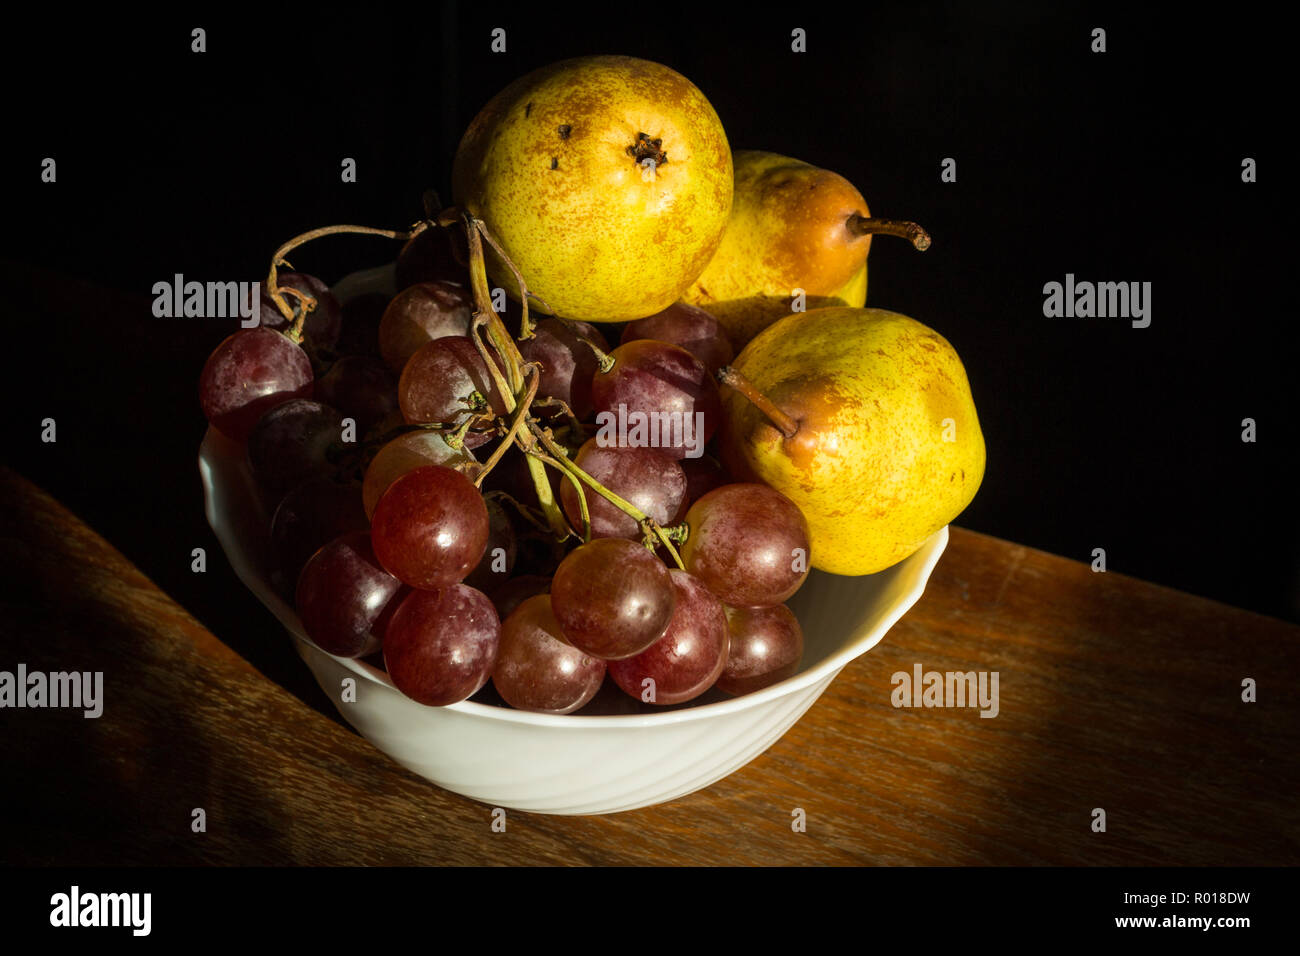 White bowl on brown table containing wine grapes and three pears isolated on black background. Stock Photo